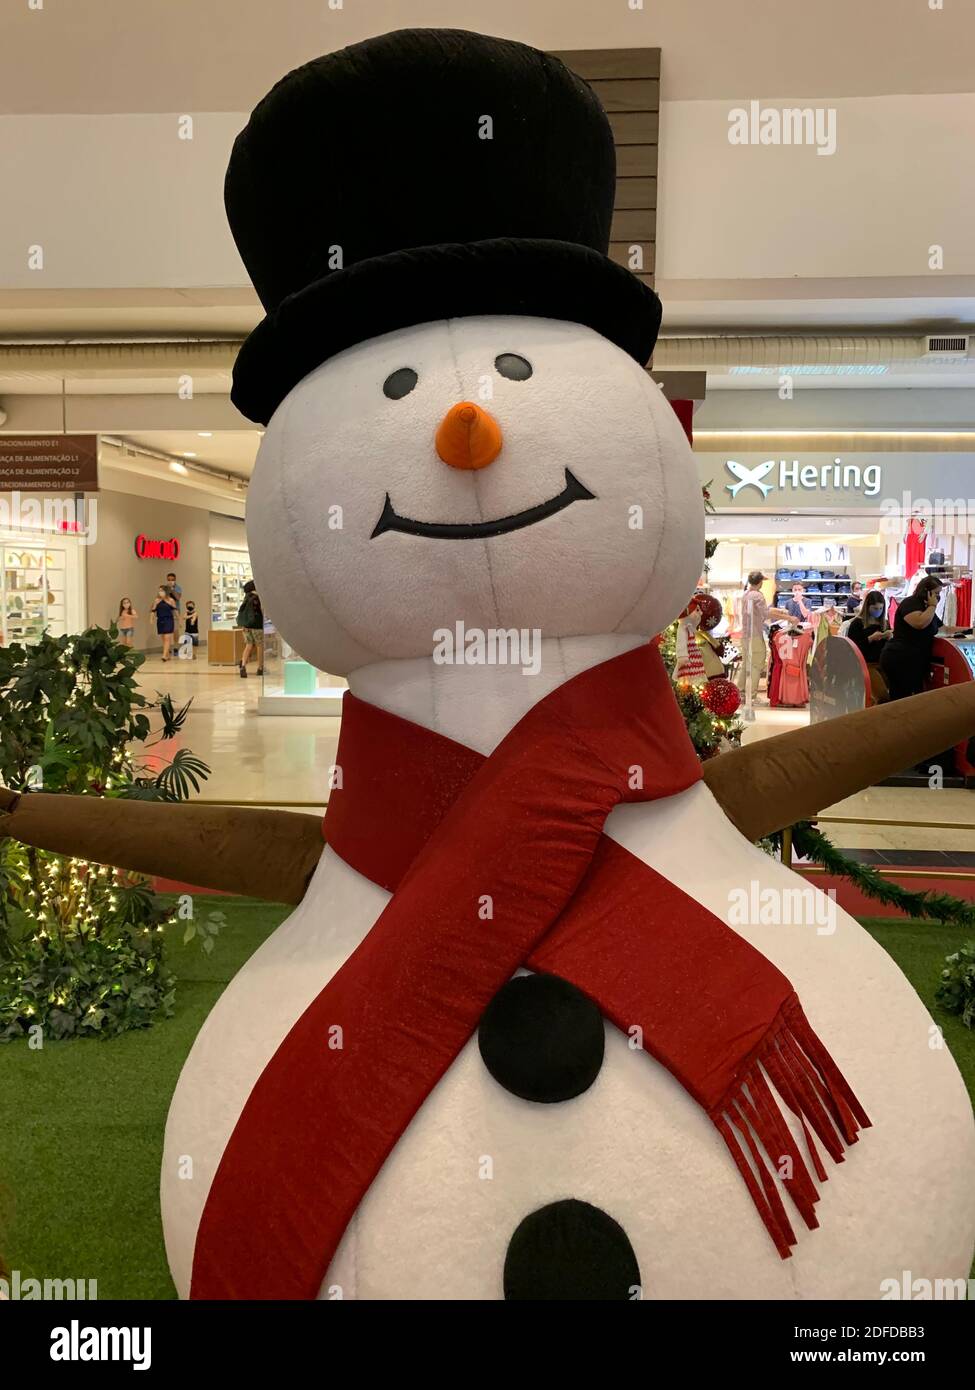 December 1, 2020. Campinas, SP, Brazil. Snowman in front of the Hering stores in a shopping center in the city. Stock Photo